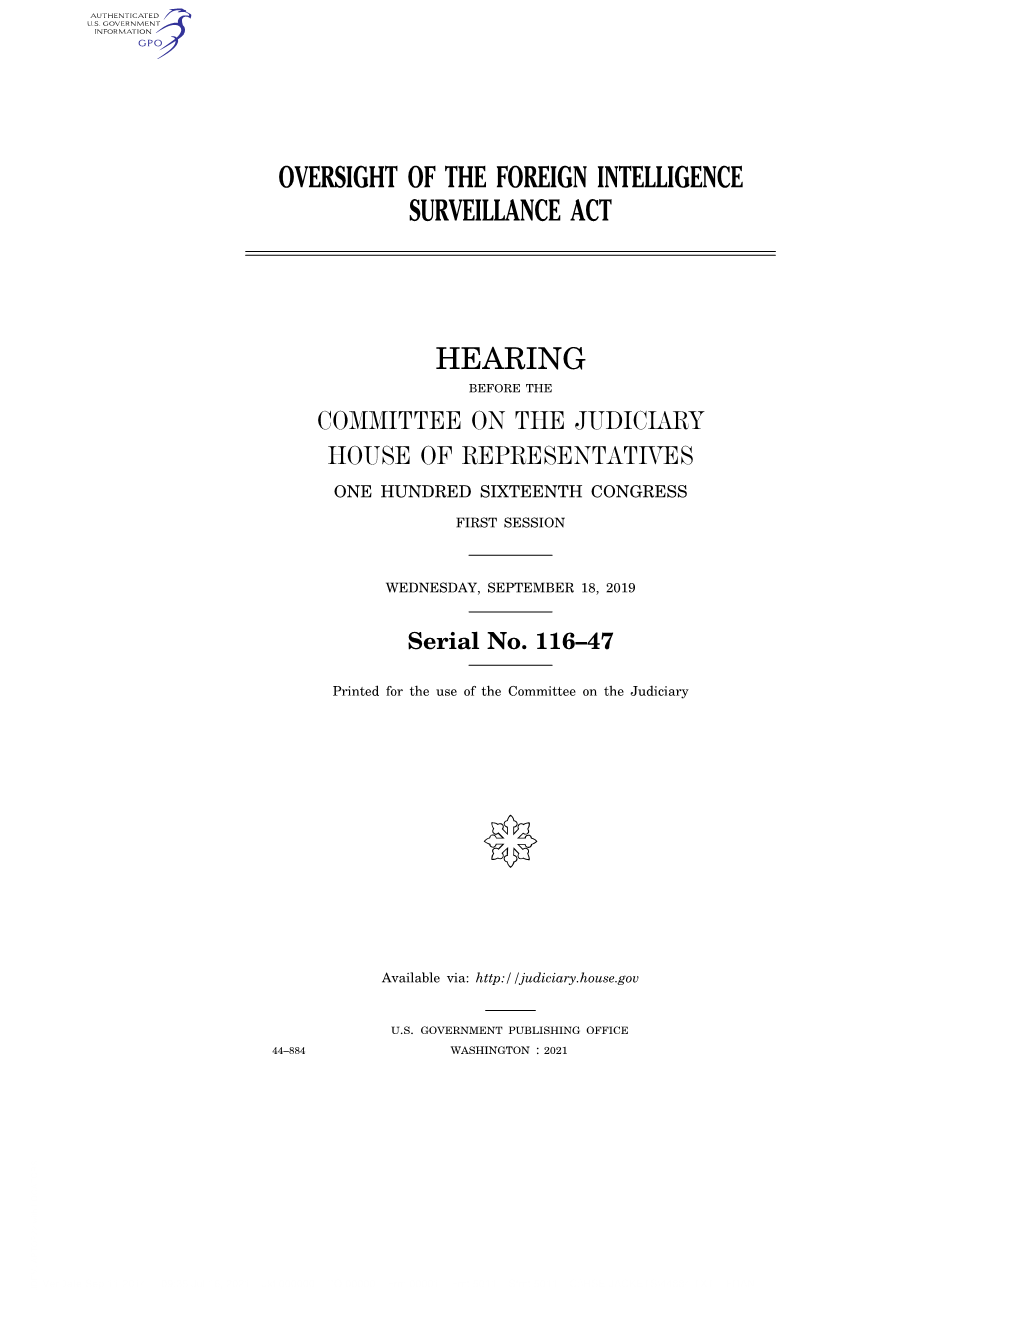 Oversight of the Foreign Intelligence Surveillance Act